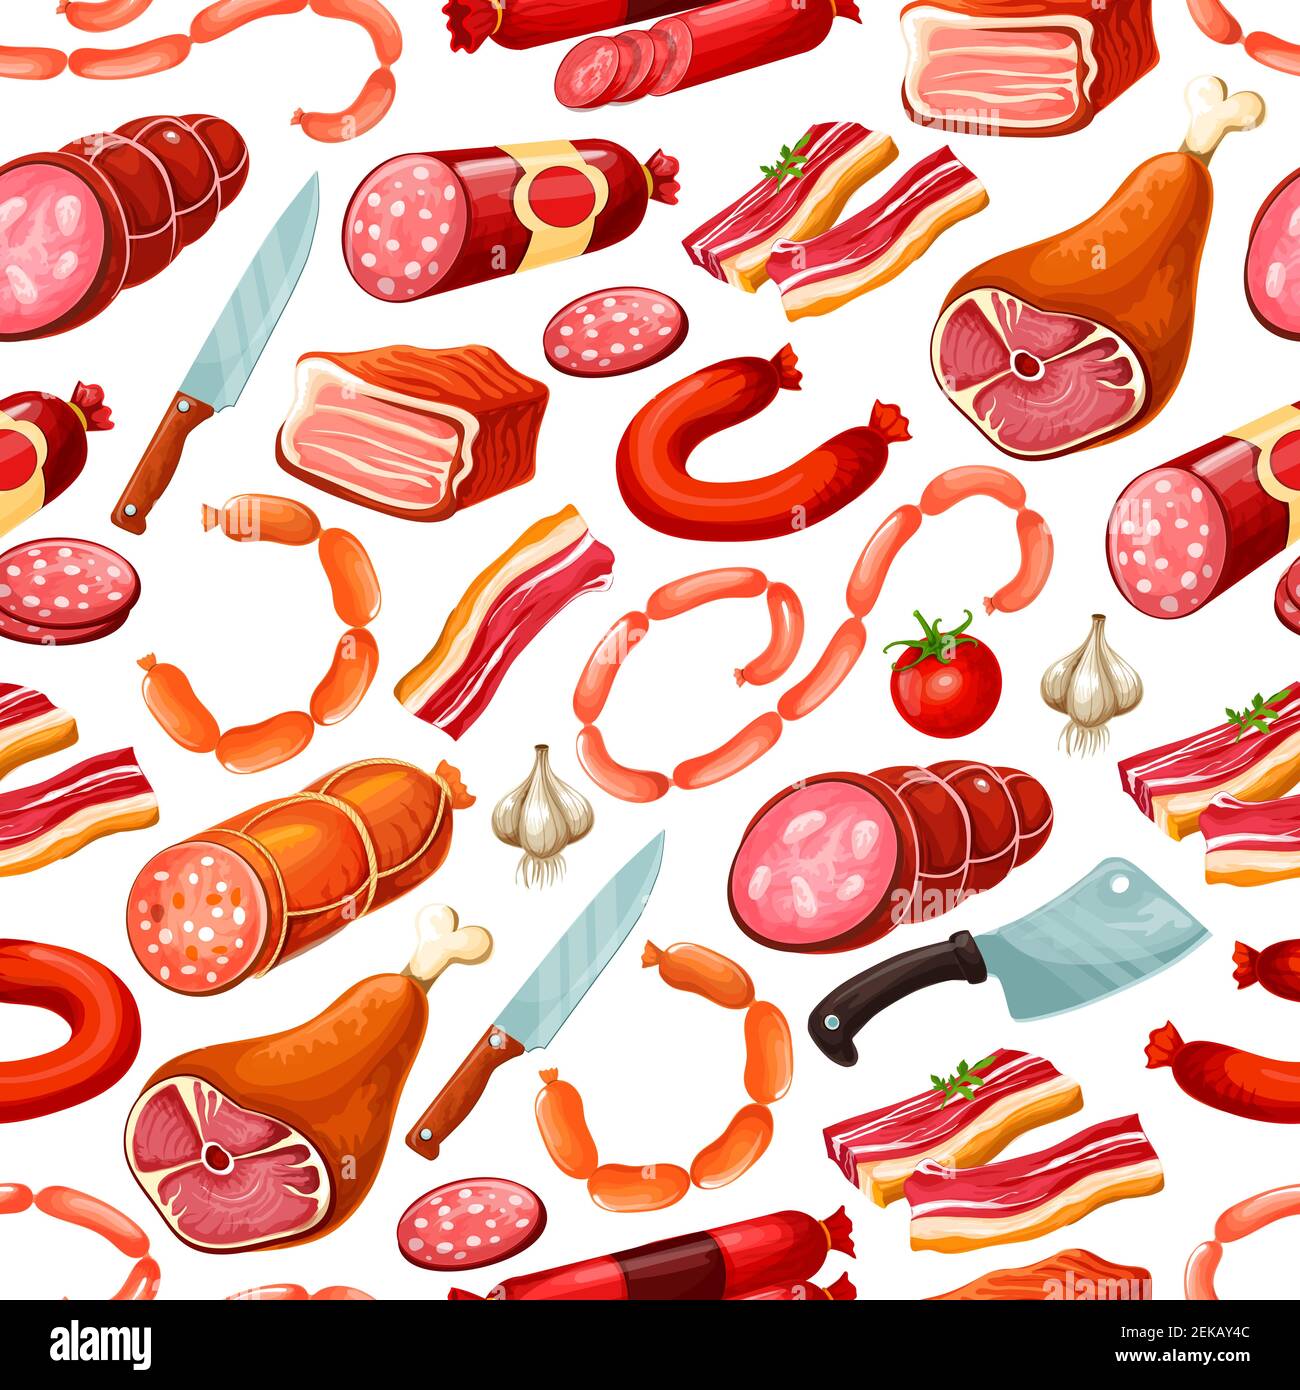 Butcher shop farm meat and natural sausages seamless pattern. Vector background of butchery meat gastronomy, salami sausage, beef steak and pork ham, Stock Vector